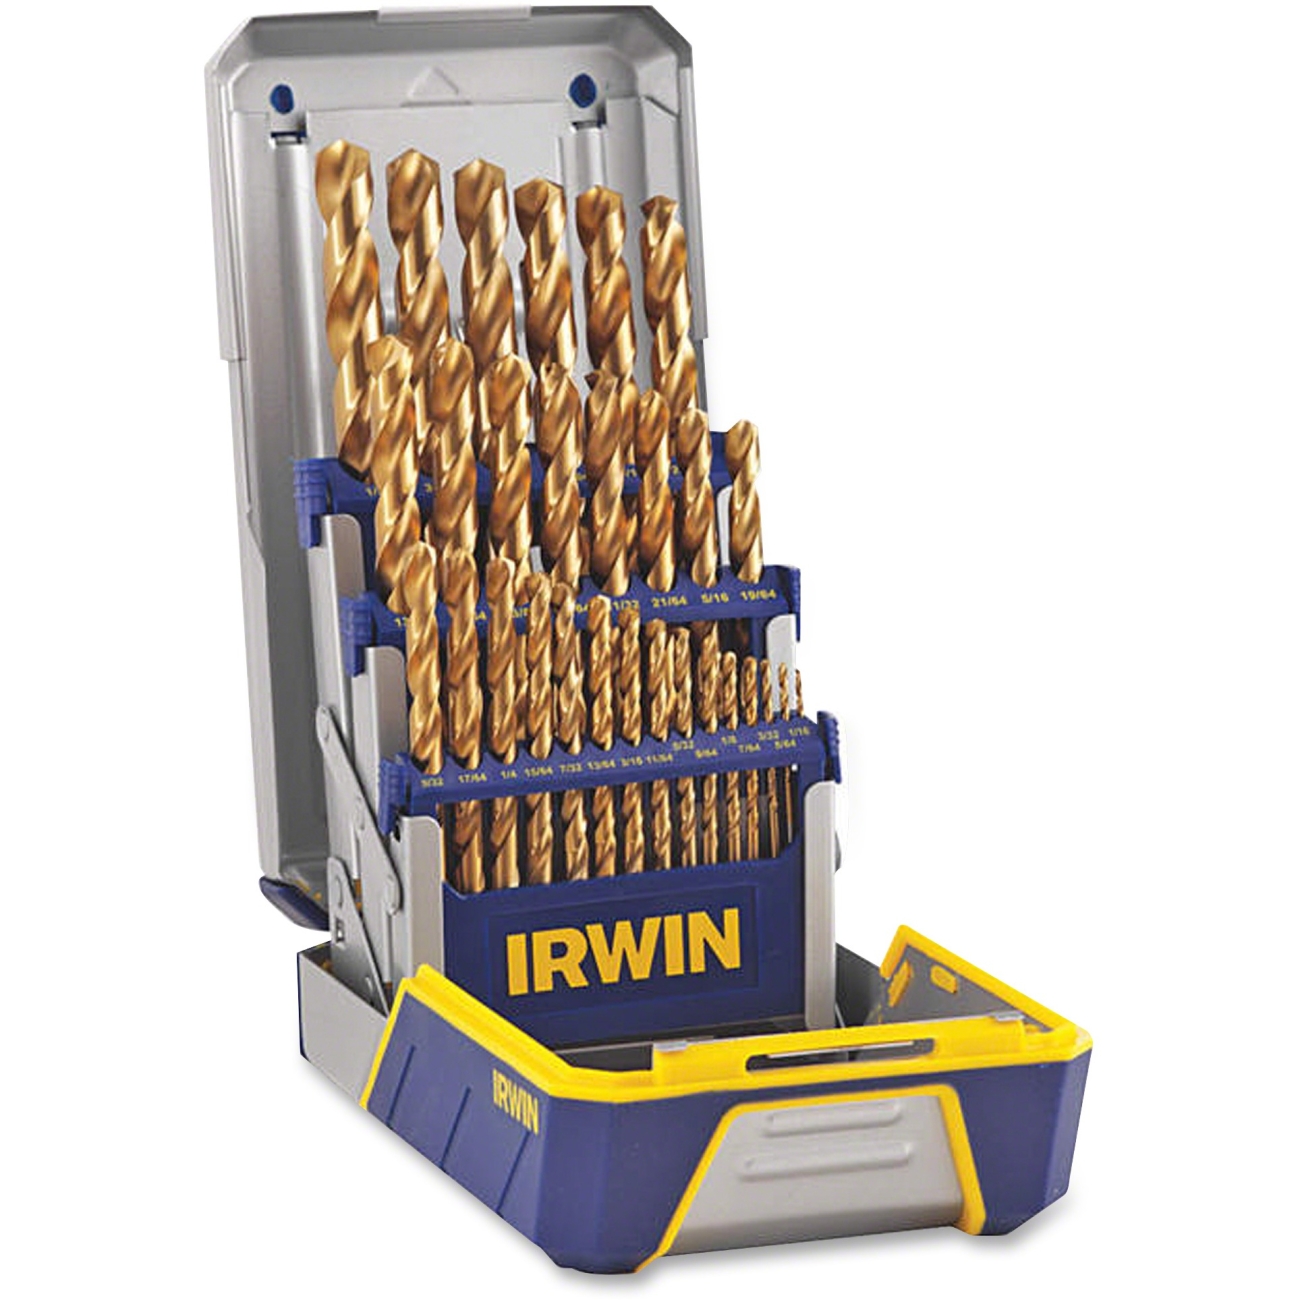 IRWIN Tools, Equipment and Safety